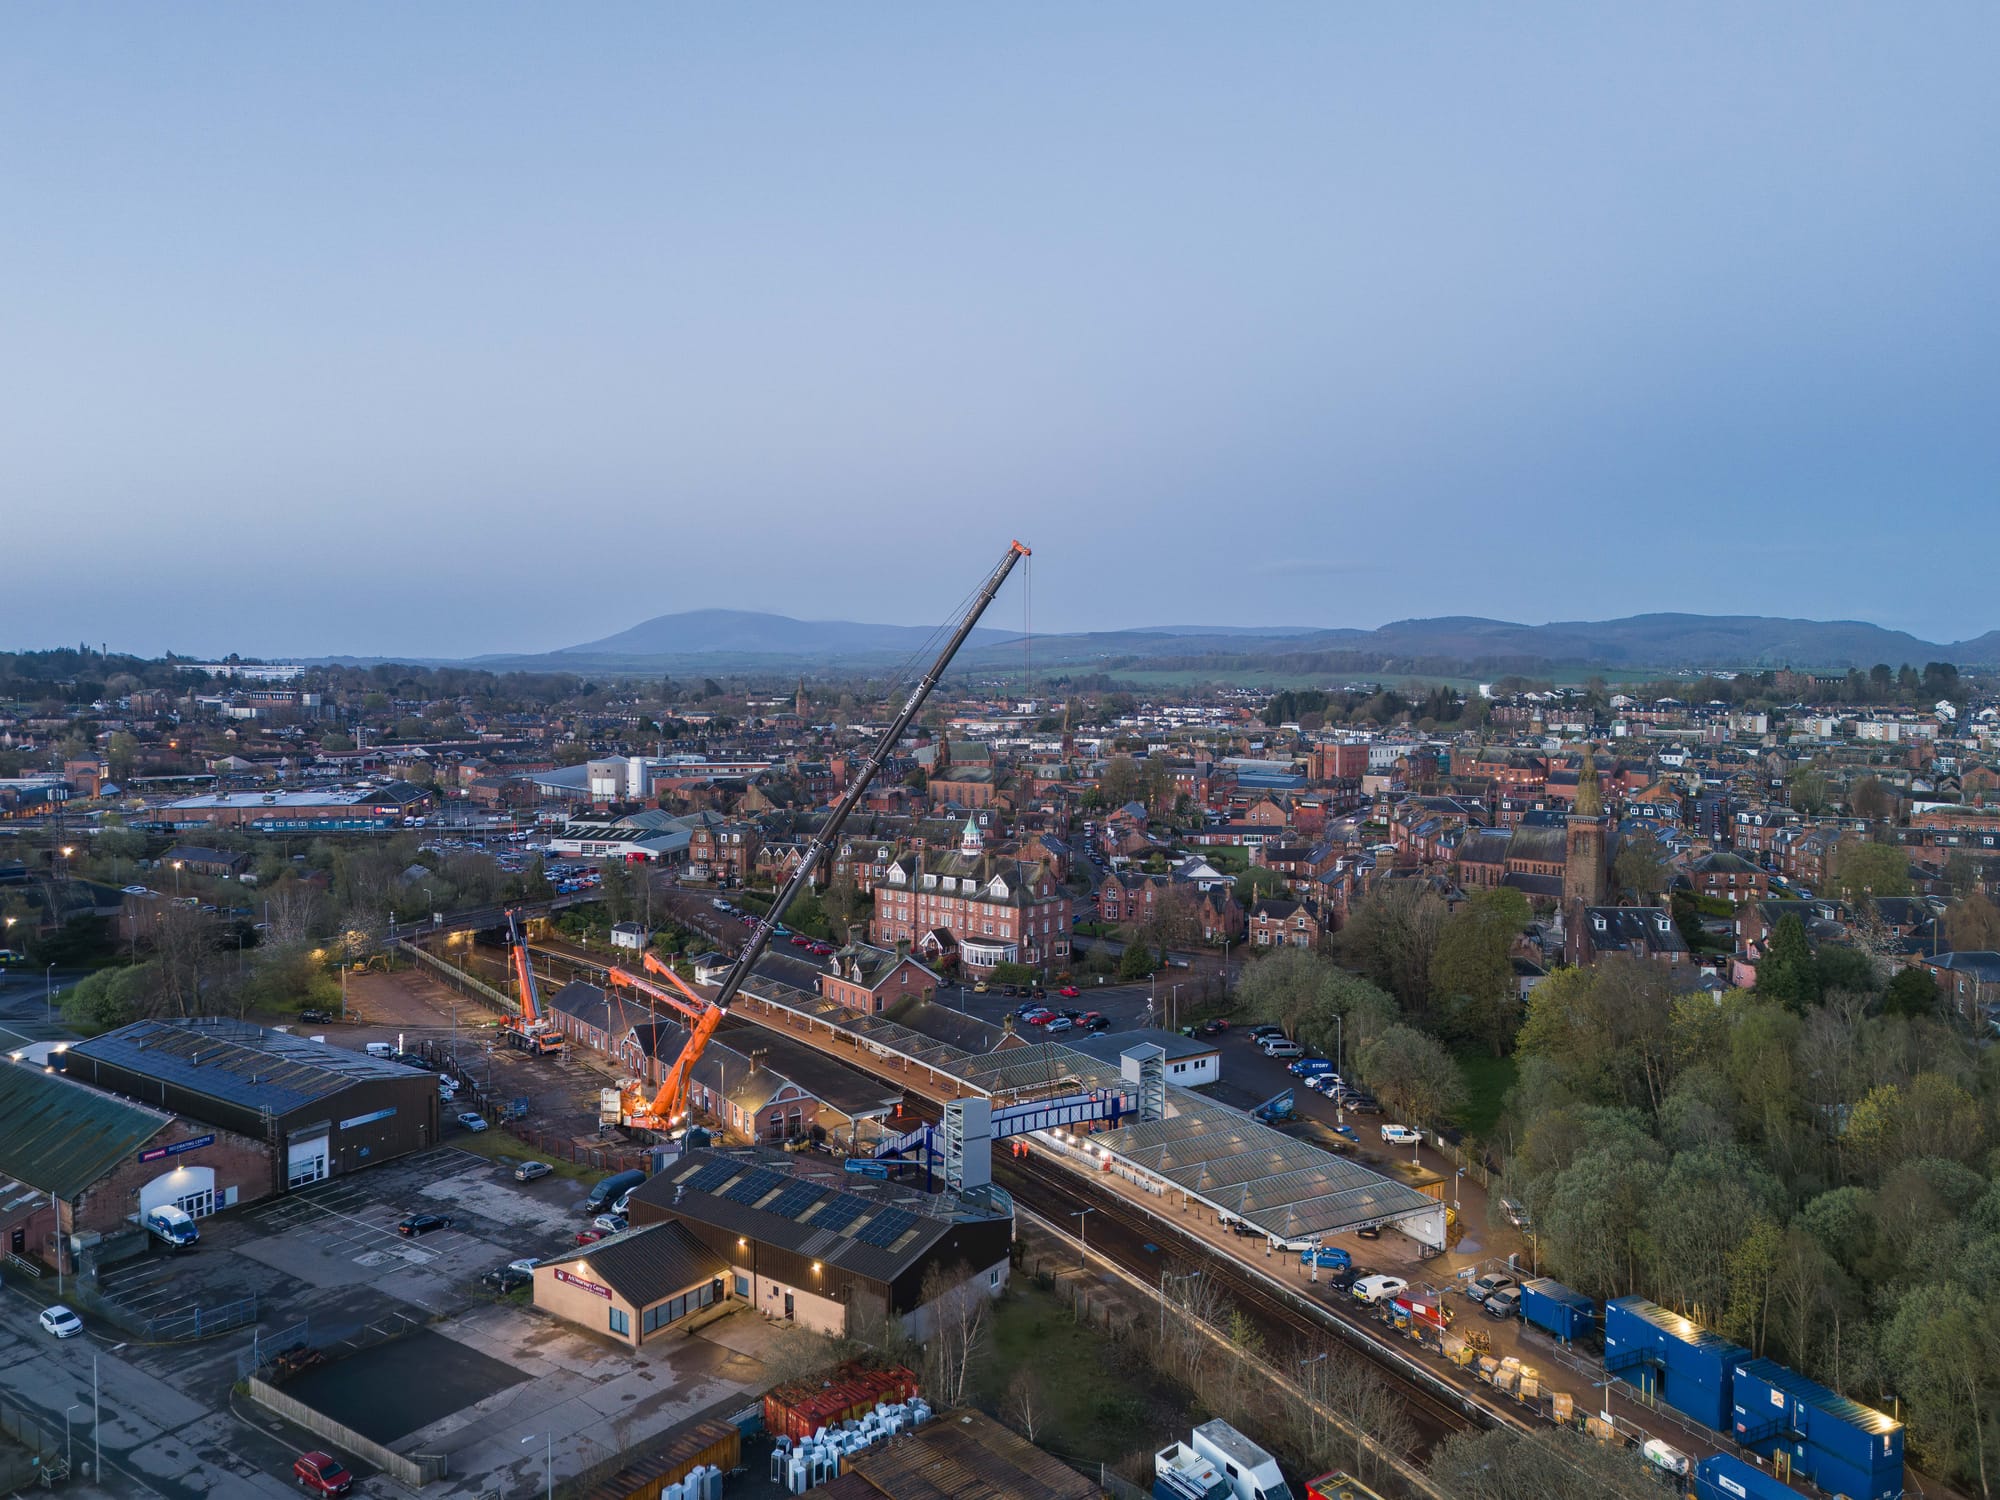 In the centre of the aerial image an orange and grey crane is seen lowering the footbridge into place. The buildings of the town can be seen behind the station and crane. In the far distance the hilly landscape can be seen.